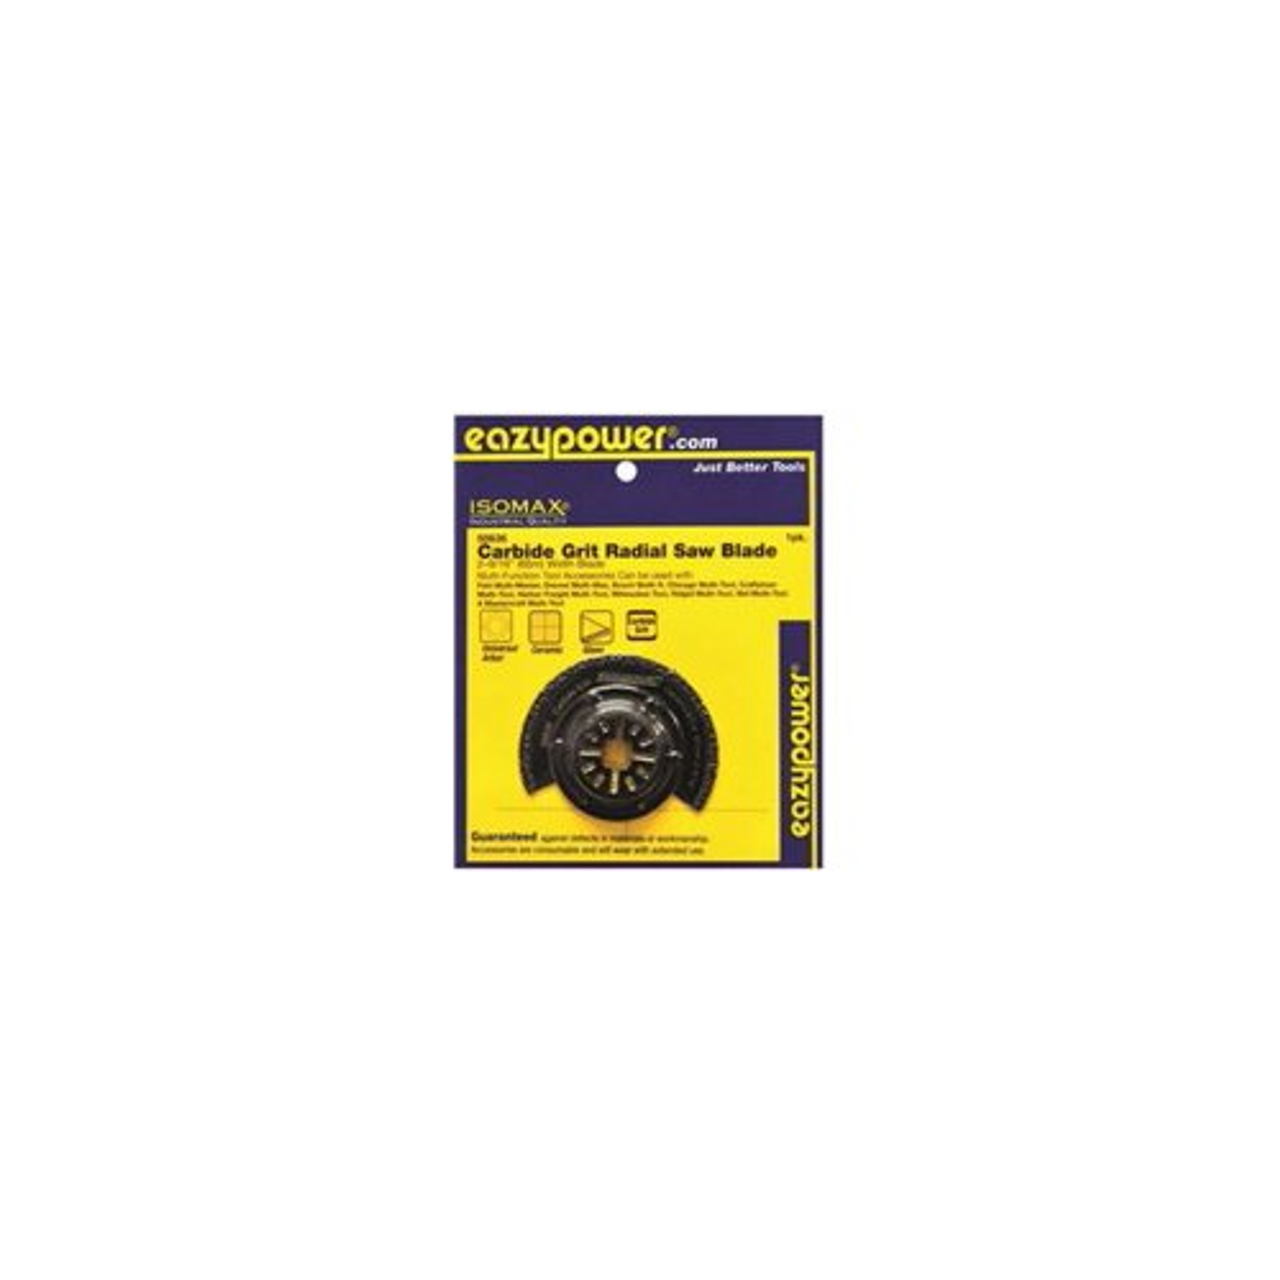 EAZYPOWER ISOMAX CARBIDE GRIT RADIAL SAW BLADE 2-9/16"" 50636